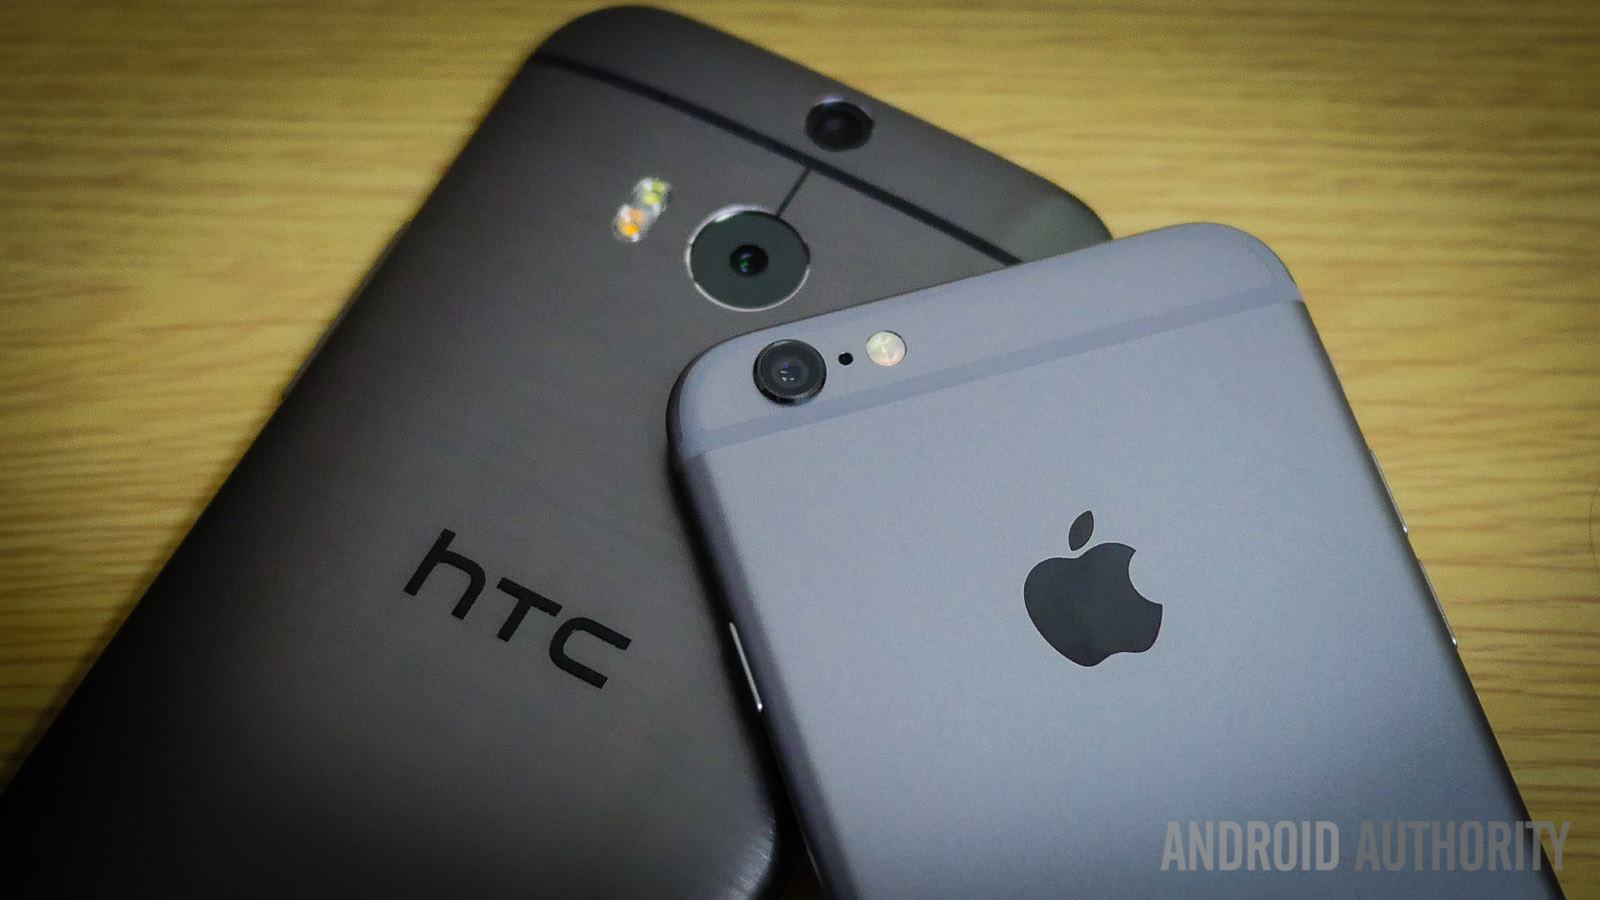 iphone 6 plus vs htc one m8 quick look aa (7 of 14)